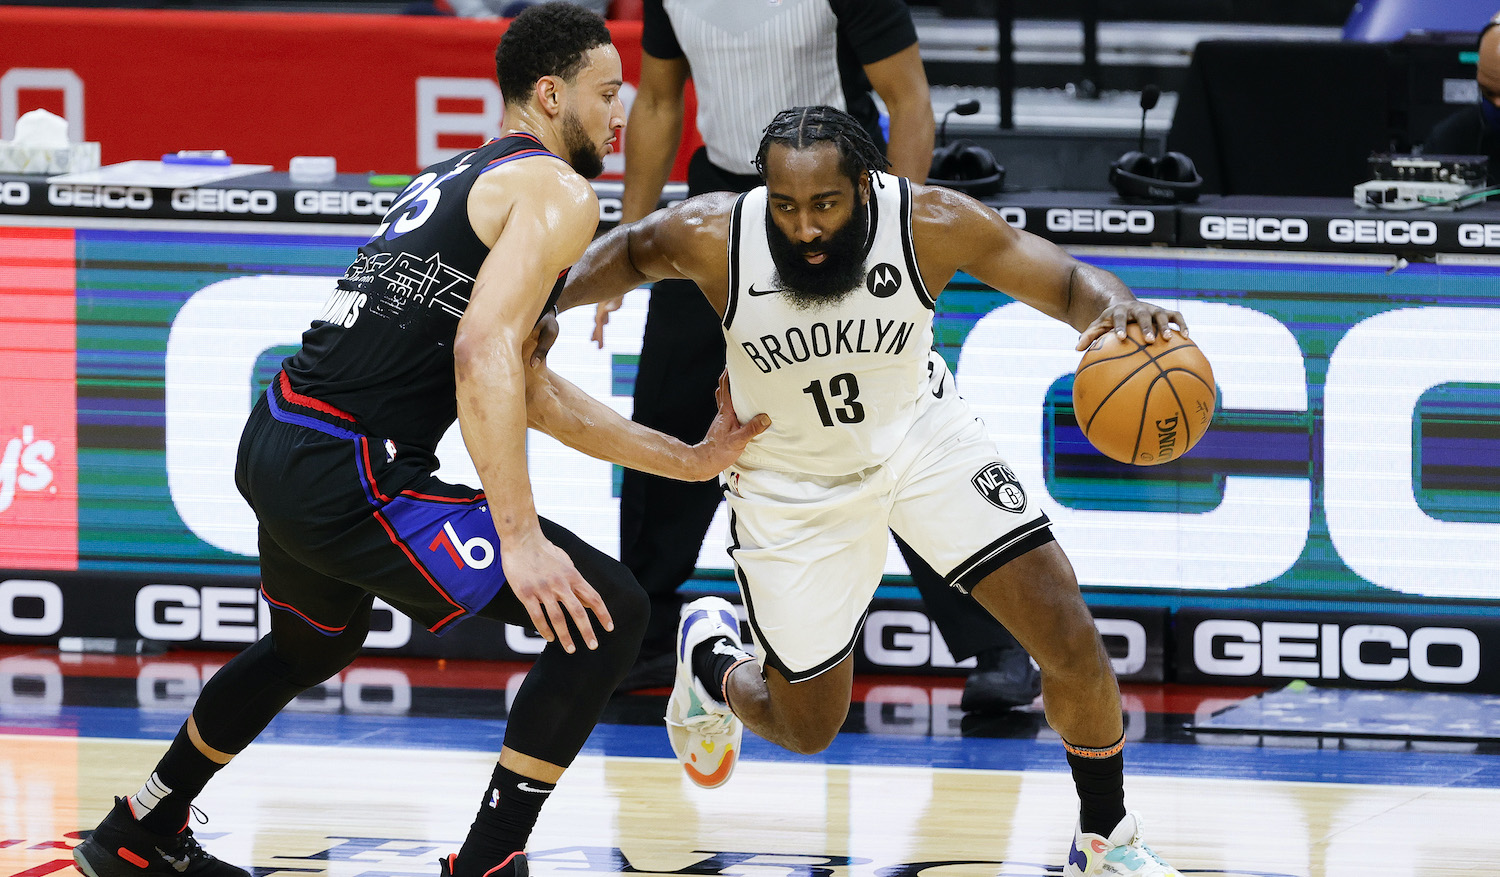 PHILADELPHIA, PENNSYLVANIA - FEBRUARY 06: James Harden #13 of the Brooklyn Nets drives against Ben Simmons #25 of the Philadelphia 76ers during the third quarter at Wells Fargo Center on February 06, 2021 in Philadelphia, Pennsylvania. NOTE TO USER: User expressly acknowledges and agrees that, by downloading and or using this photograph, User is consenting to the terms and conditions of the Getty Images License Agreement. (Photo by Tim Nwachukwu/Getty Images)